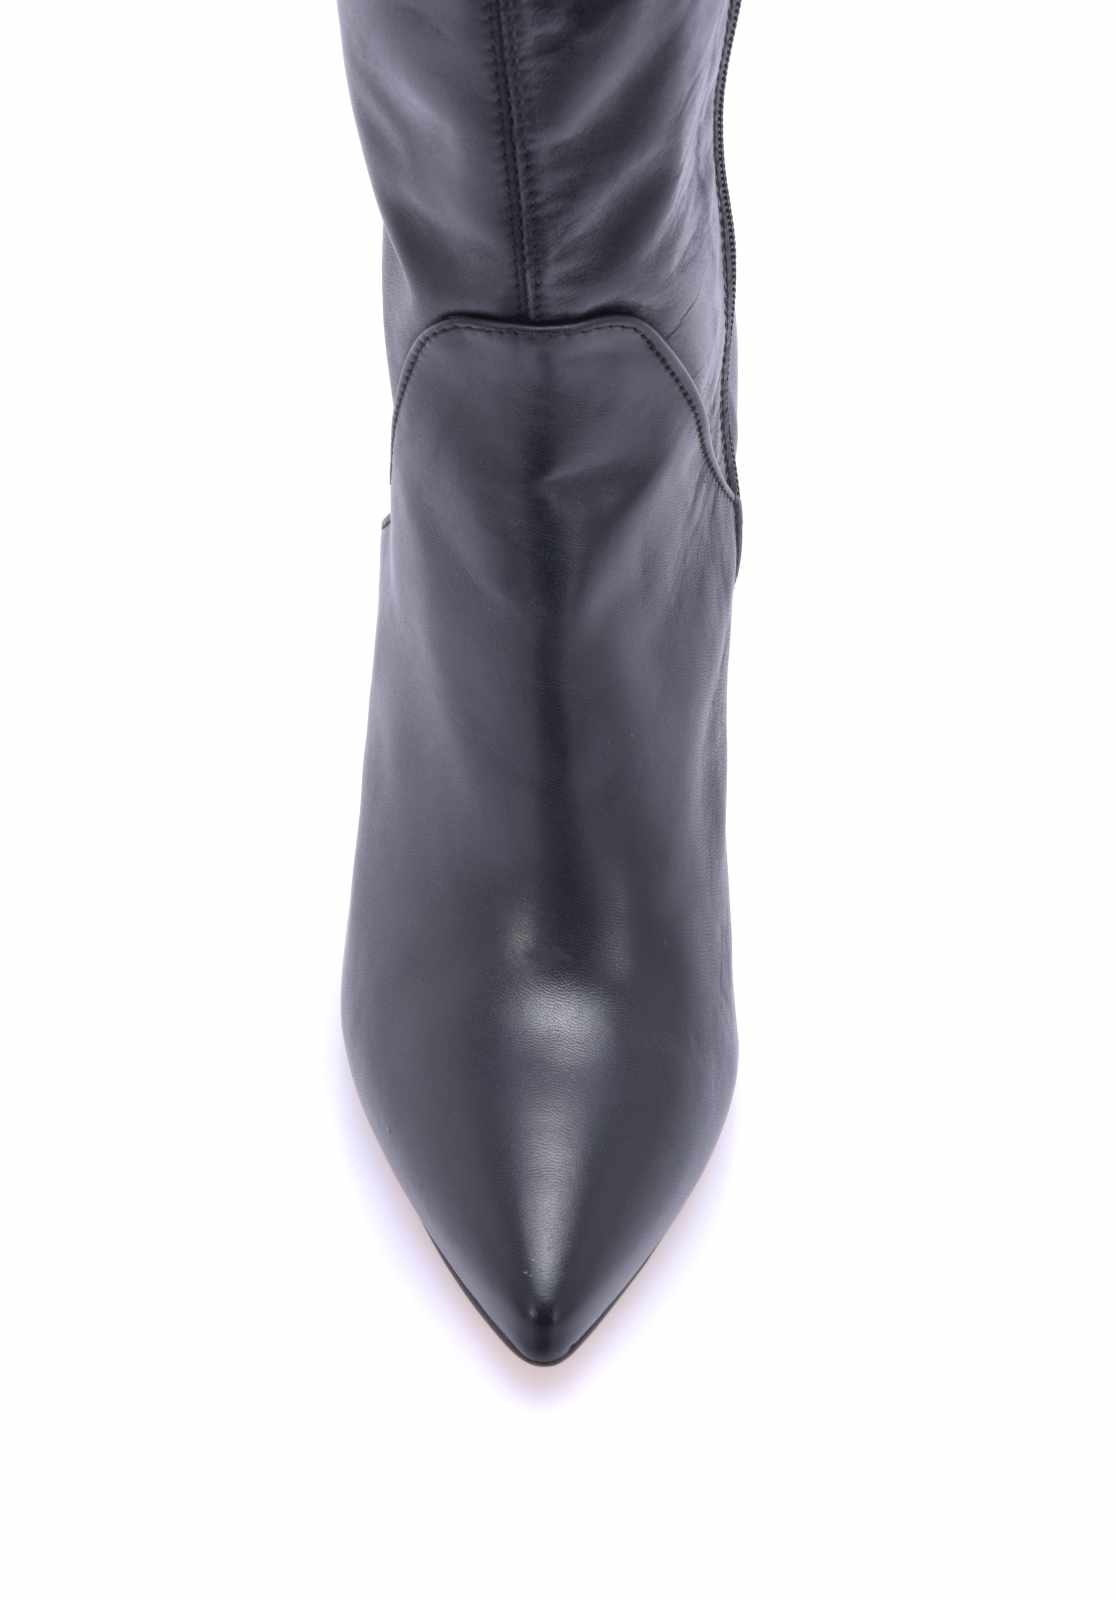 Thigh high boots with 10cm heels in real leather - Italian High Heels ...